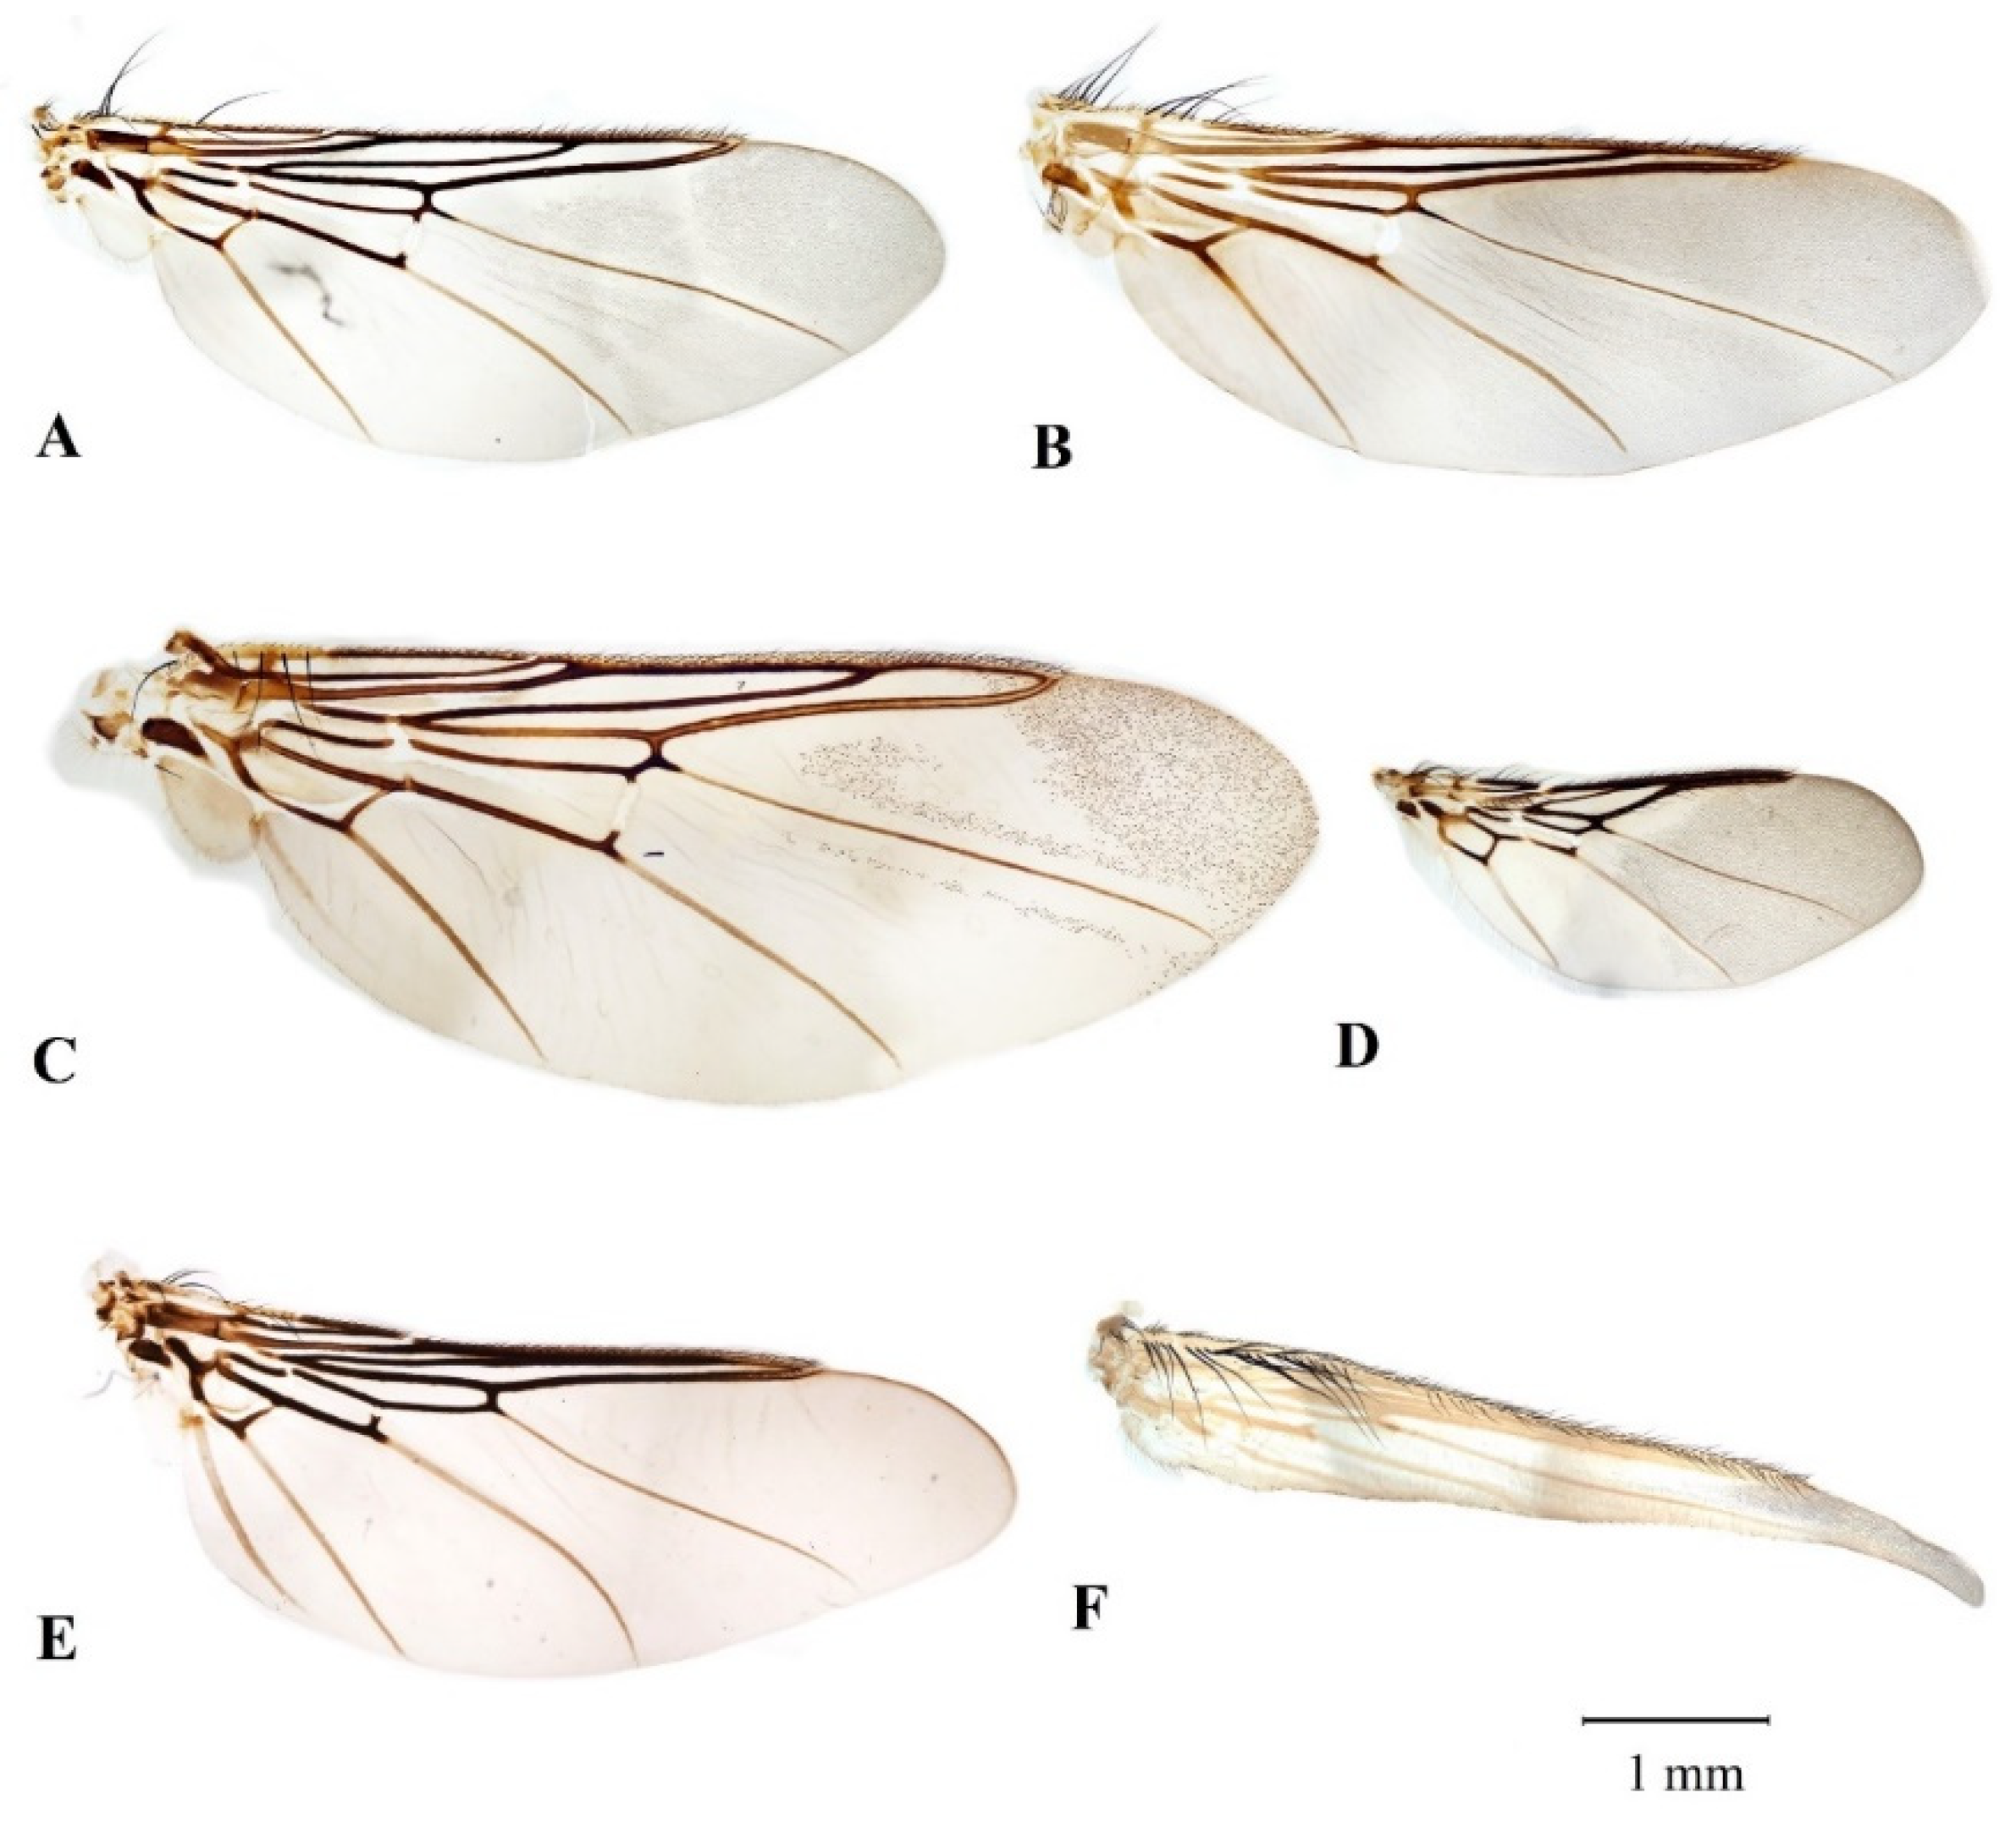 Microorganisms | Free Full-Text | Avian Louse Flies and Their Trypanosomes:  New Vectors, New Lineages and Host&ndash;Parasite Associations